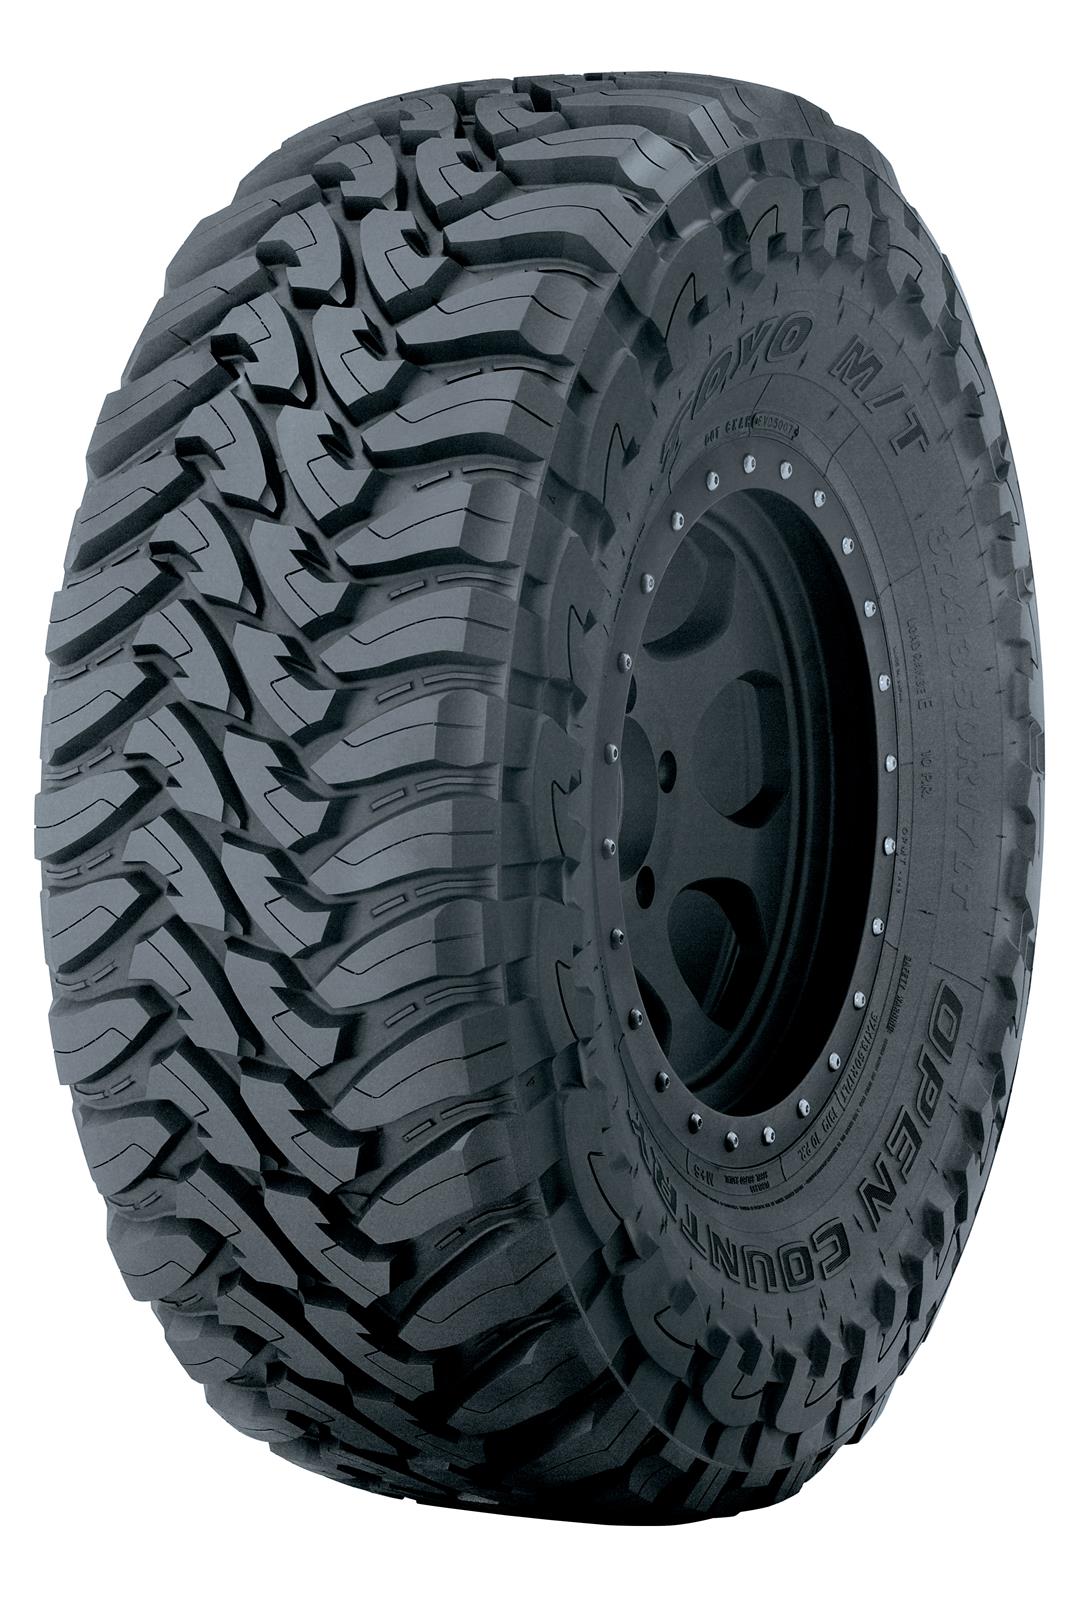 Toyo Tires 361170 Toyo Open Country M/T Tires | Summit Racing